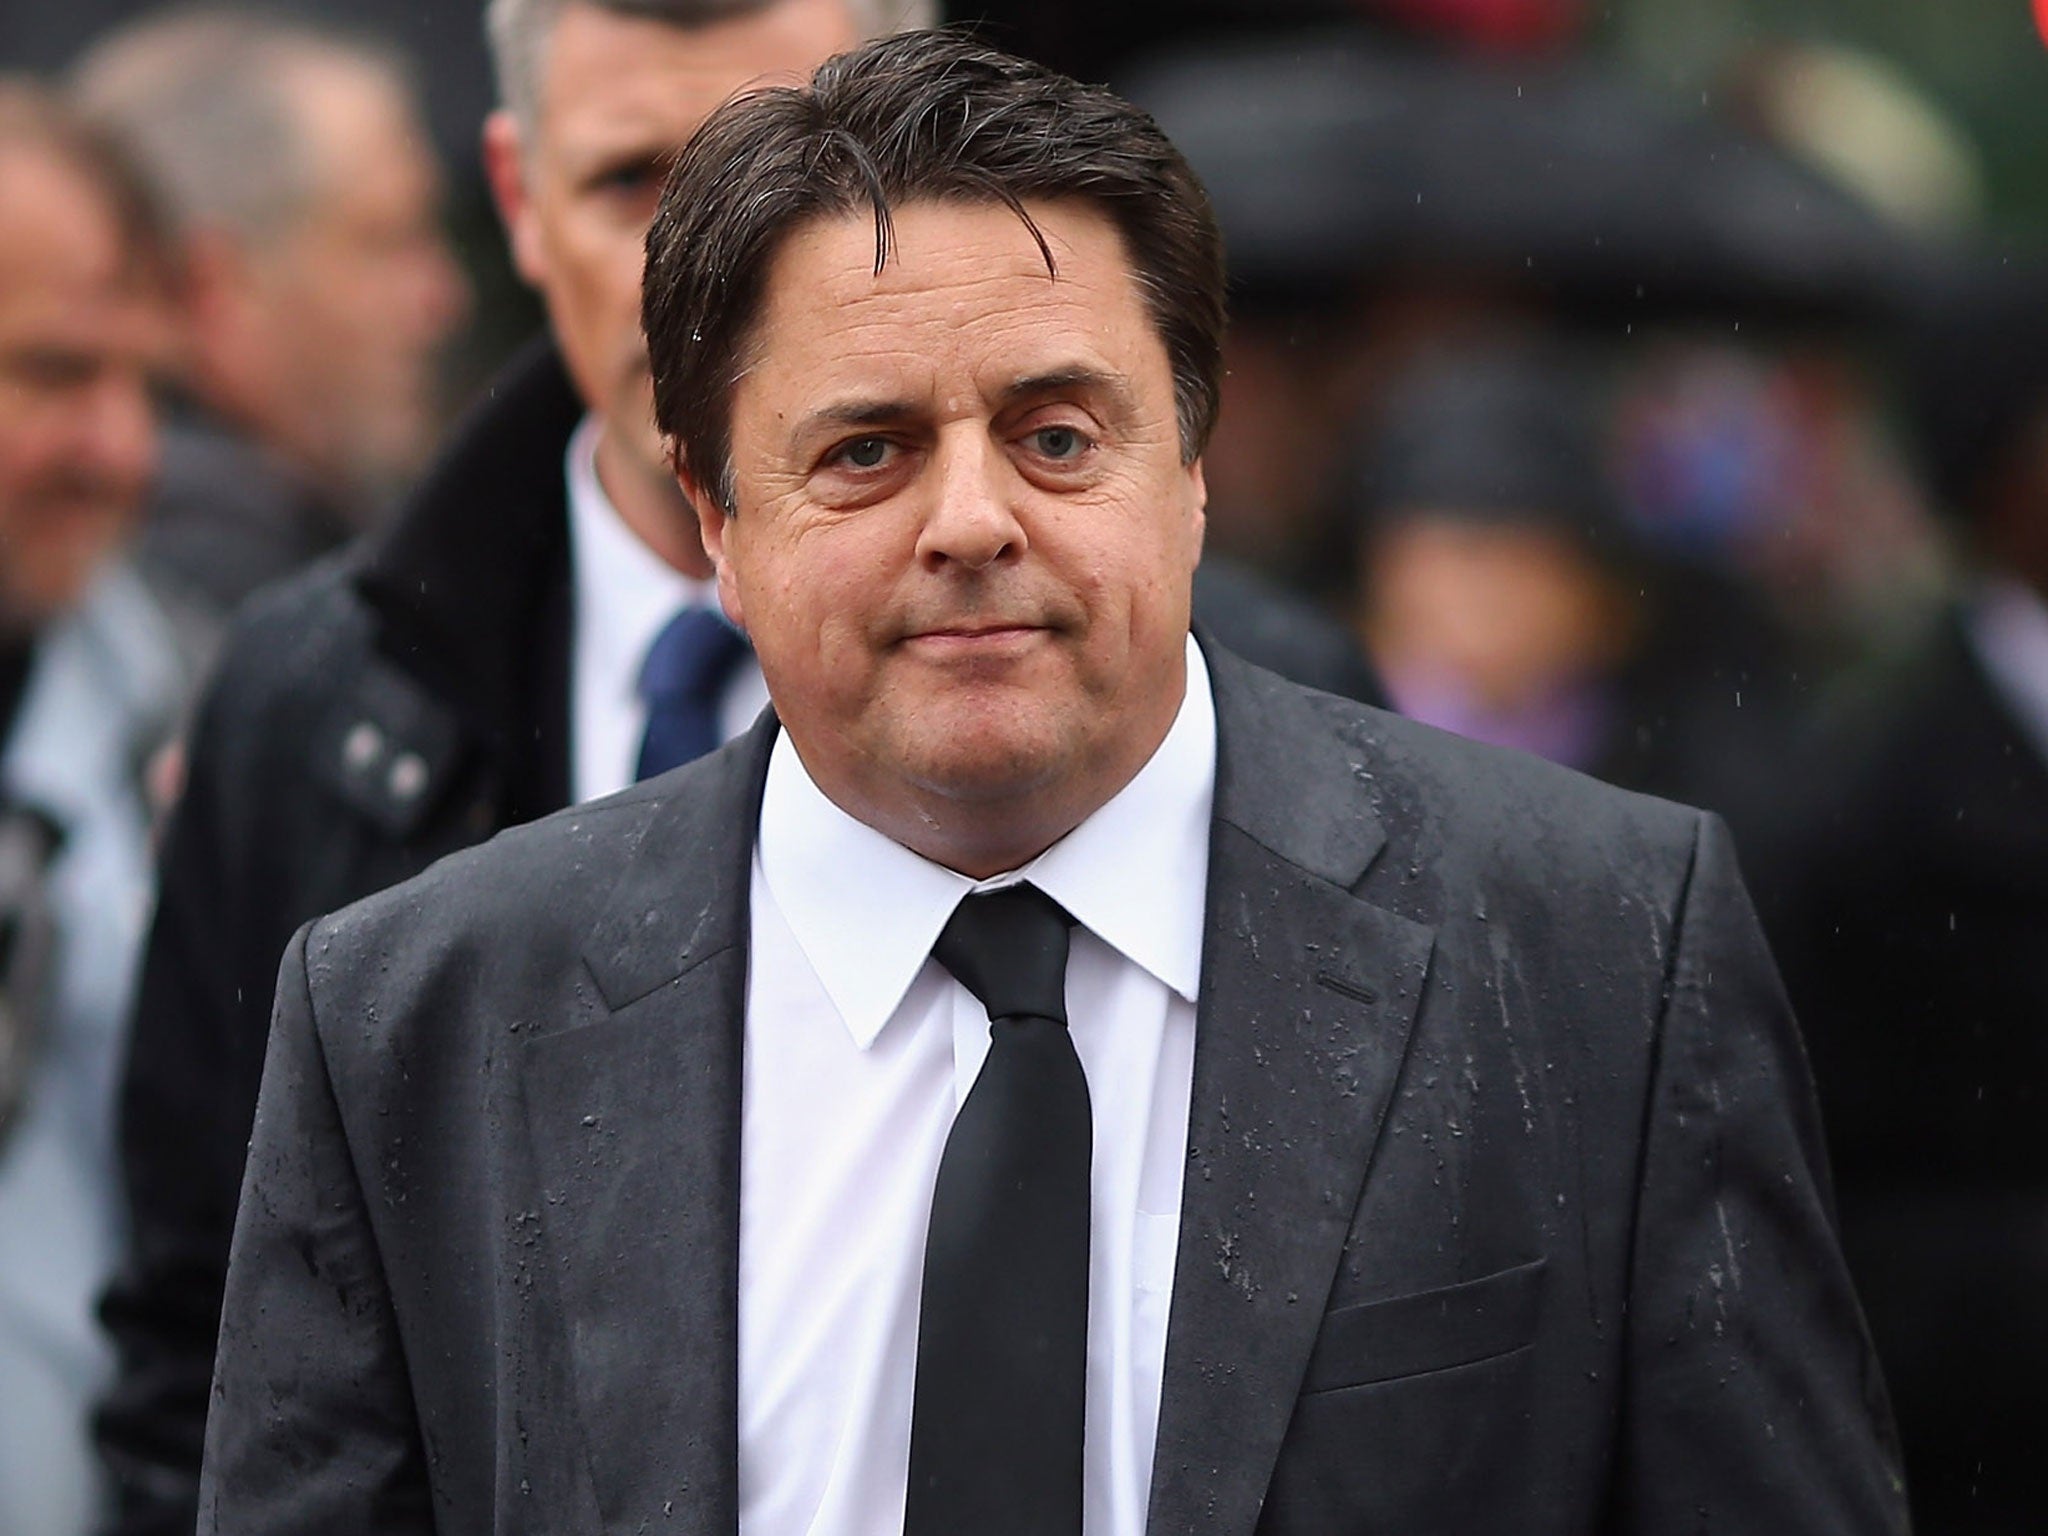 Nick Griffin has been expelled from the BNP